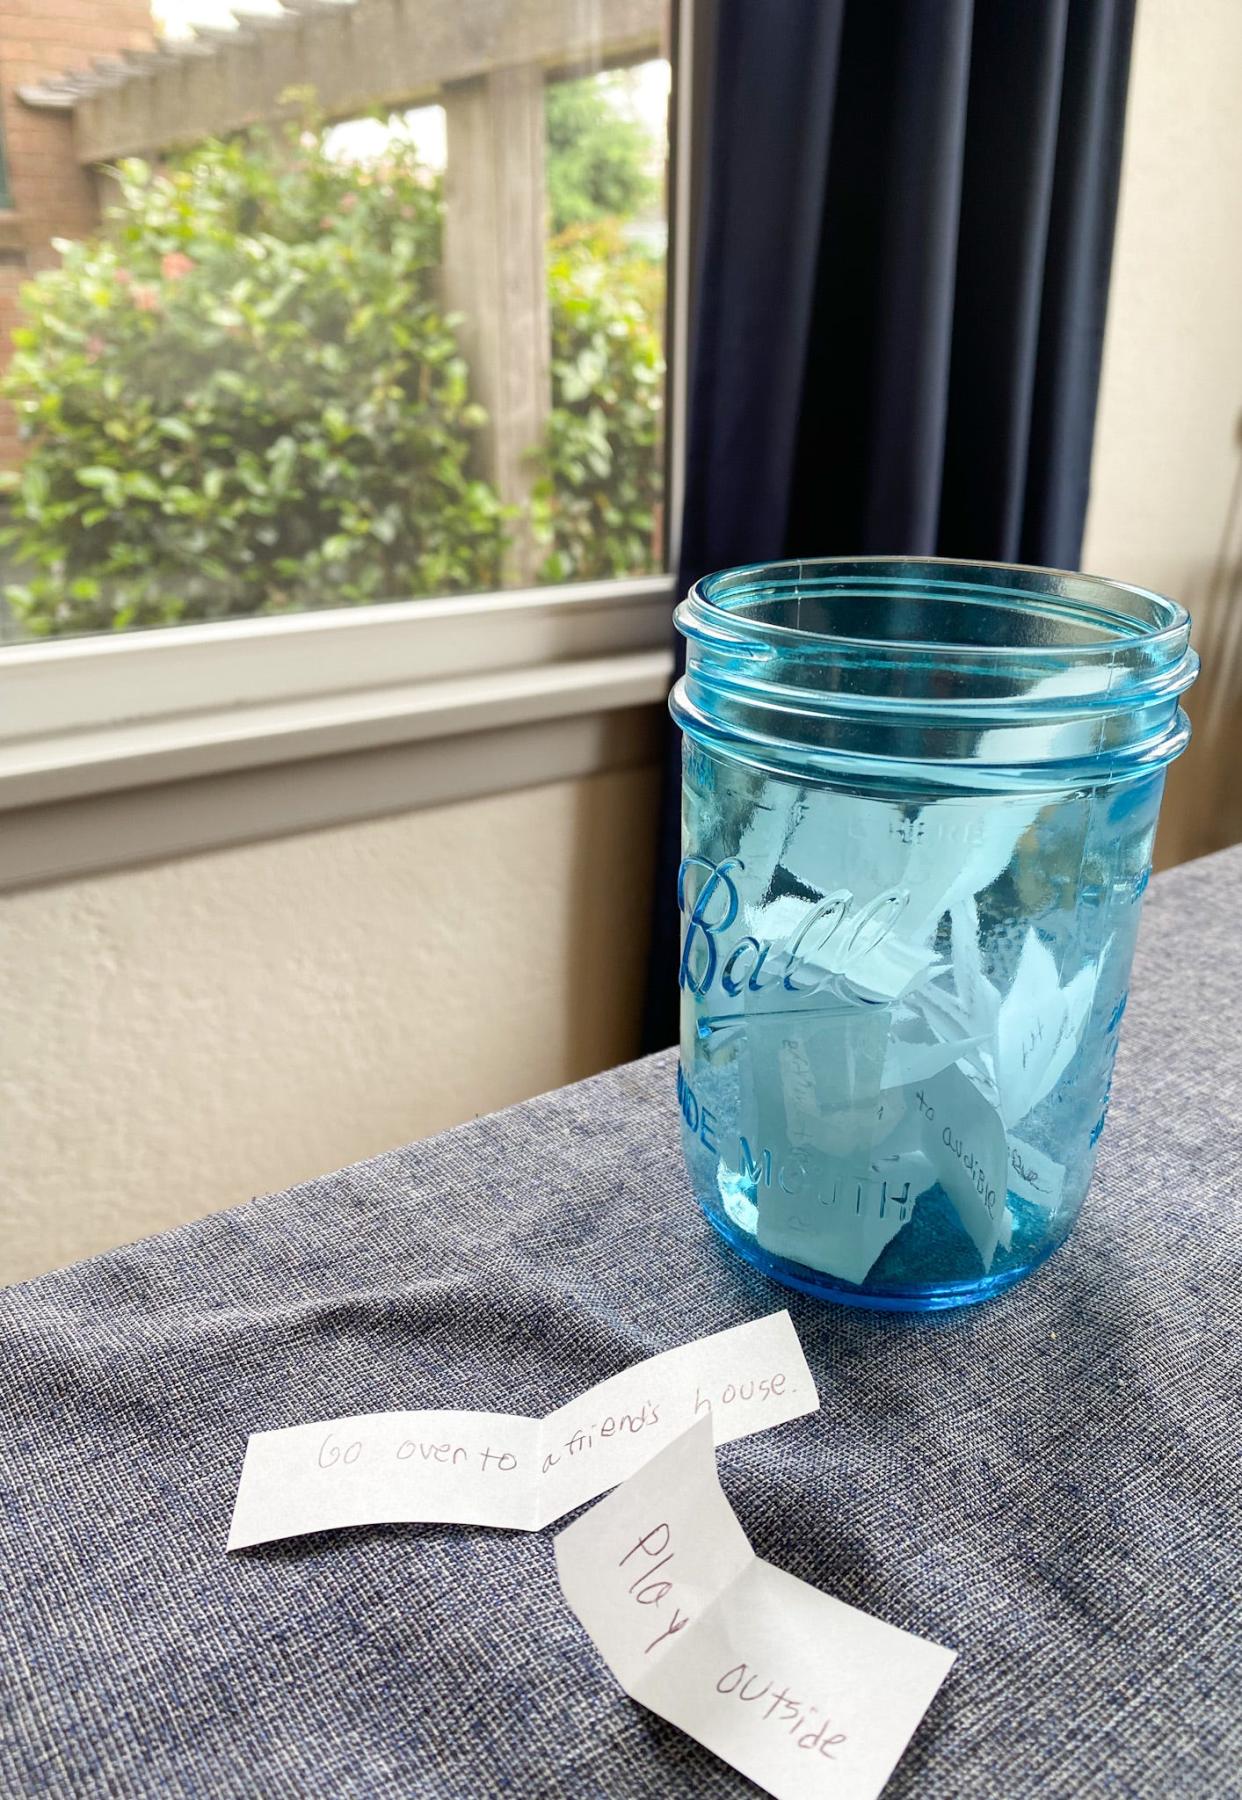 While taking advantage of camps, summer reading programs and more can keep kids busy during the summer, an "I'm Bored" jar helps direct them when they run out of things to do.